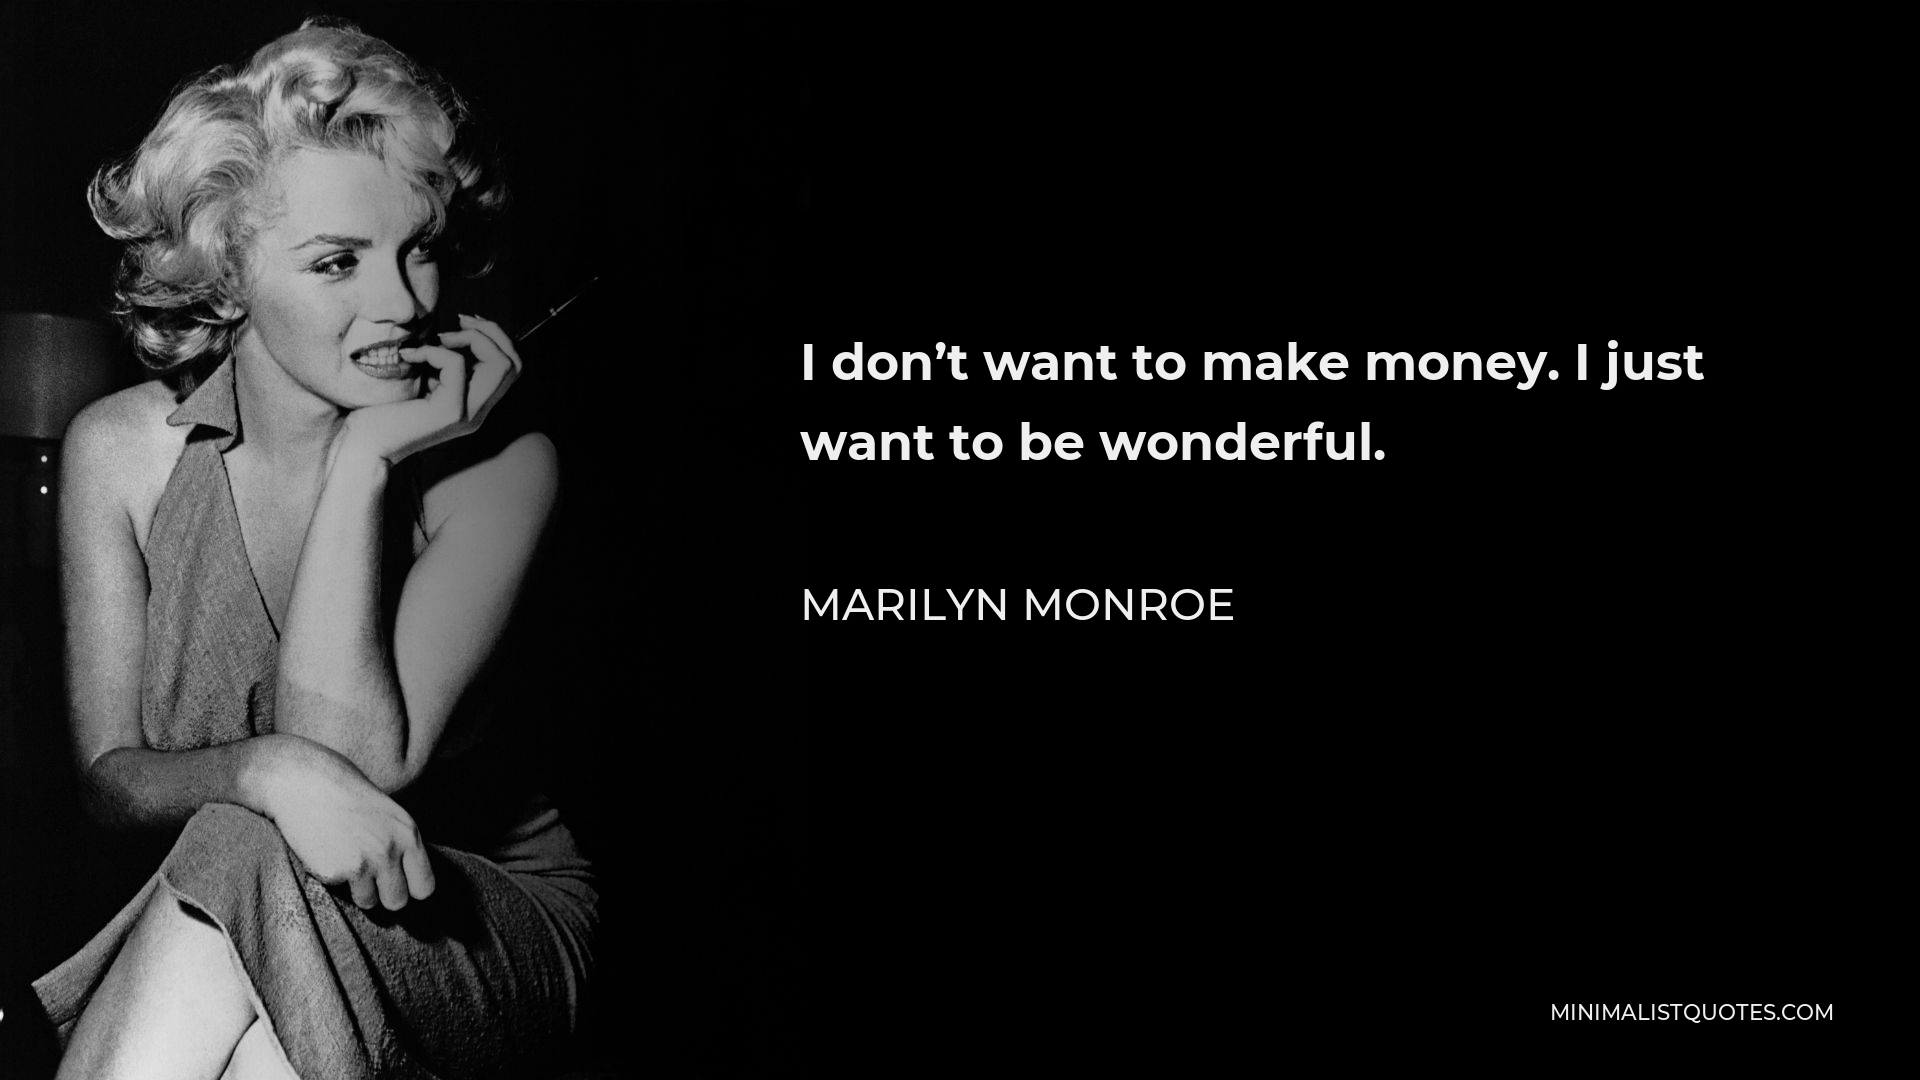 Marilyn Monroe Quote - I don’t want to make money. I just want to be wonderful.